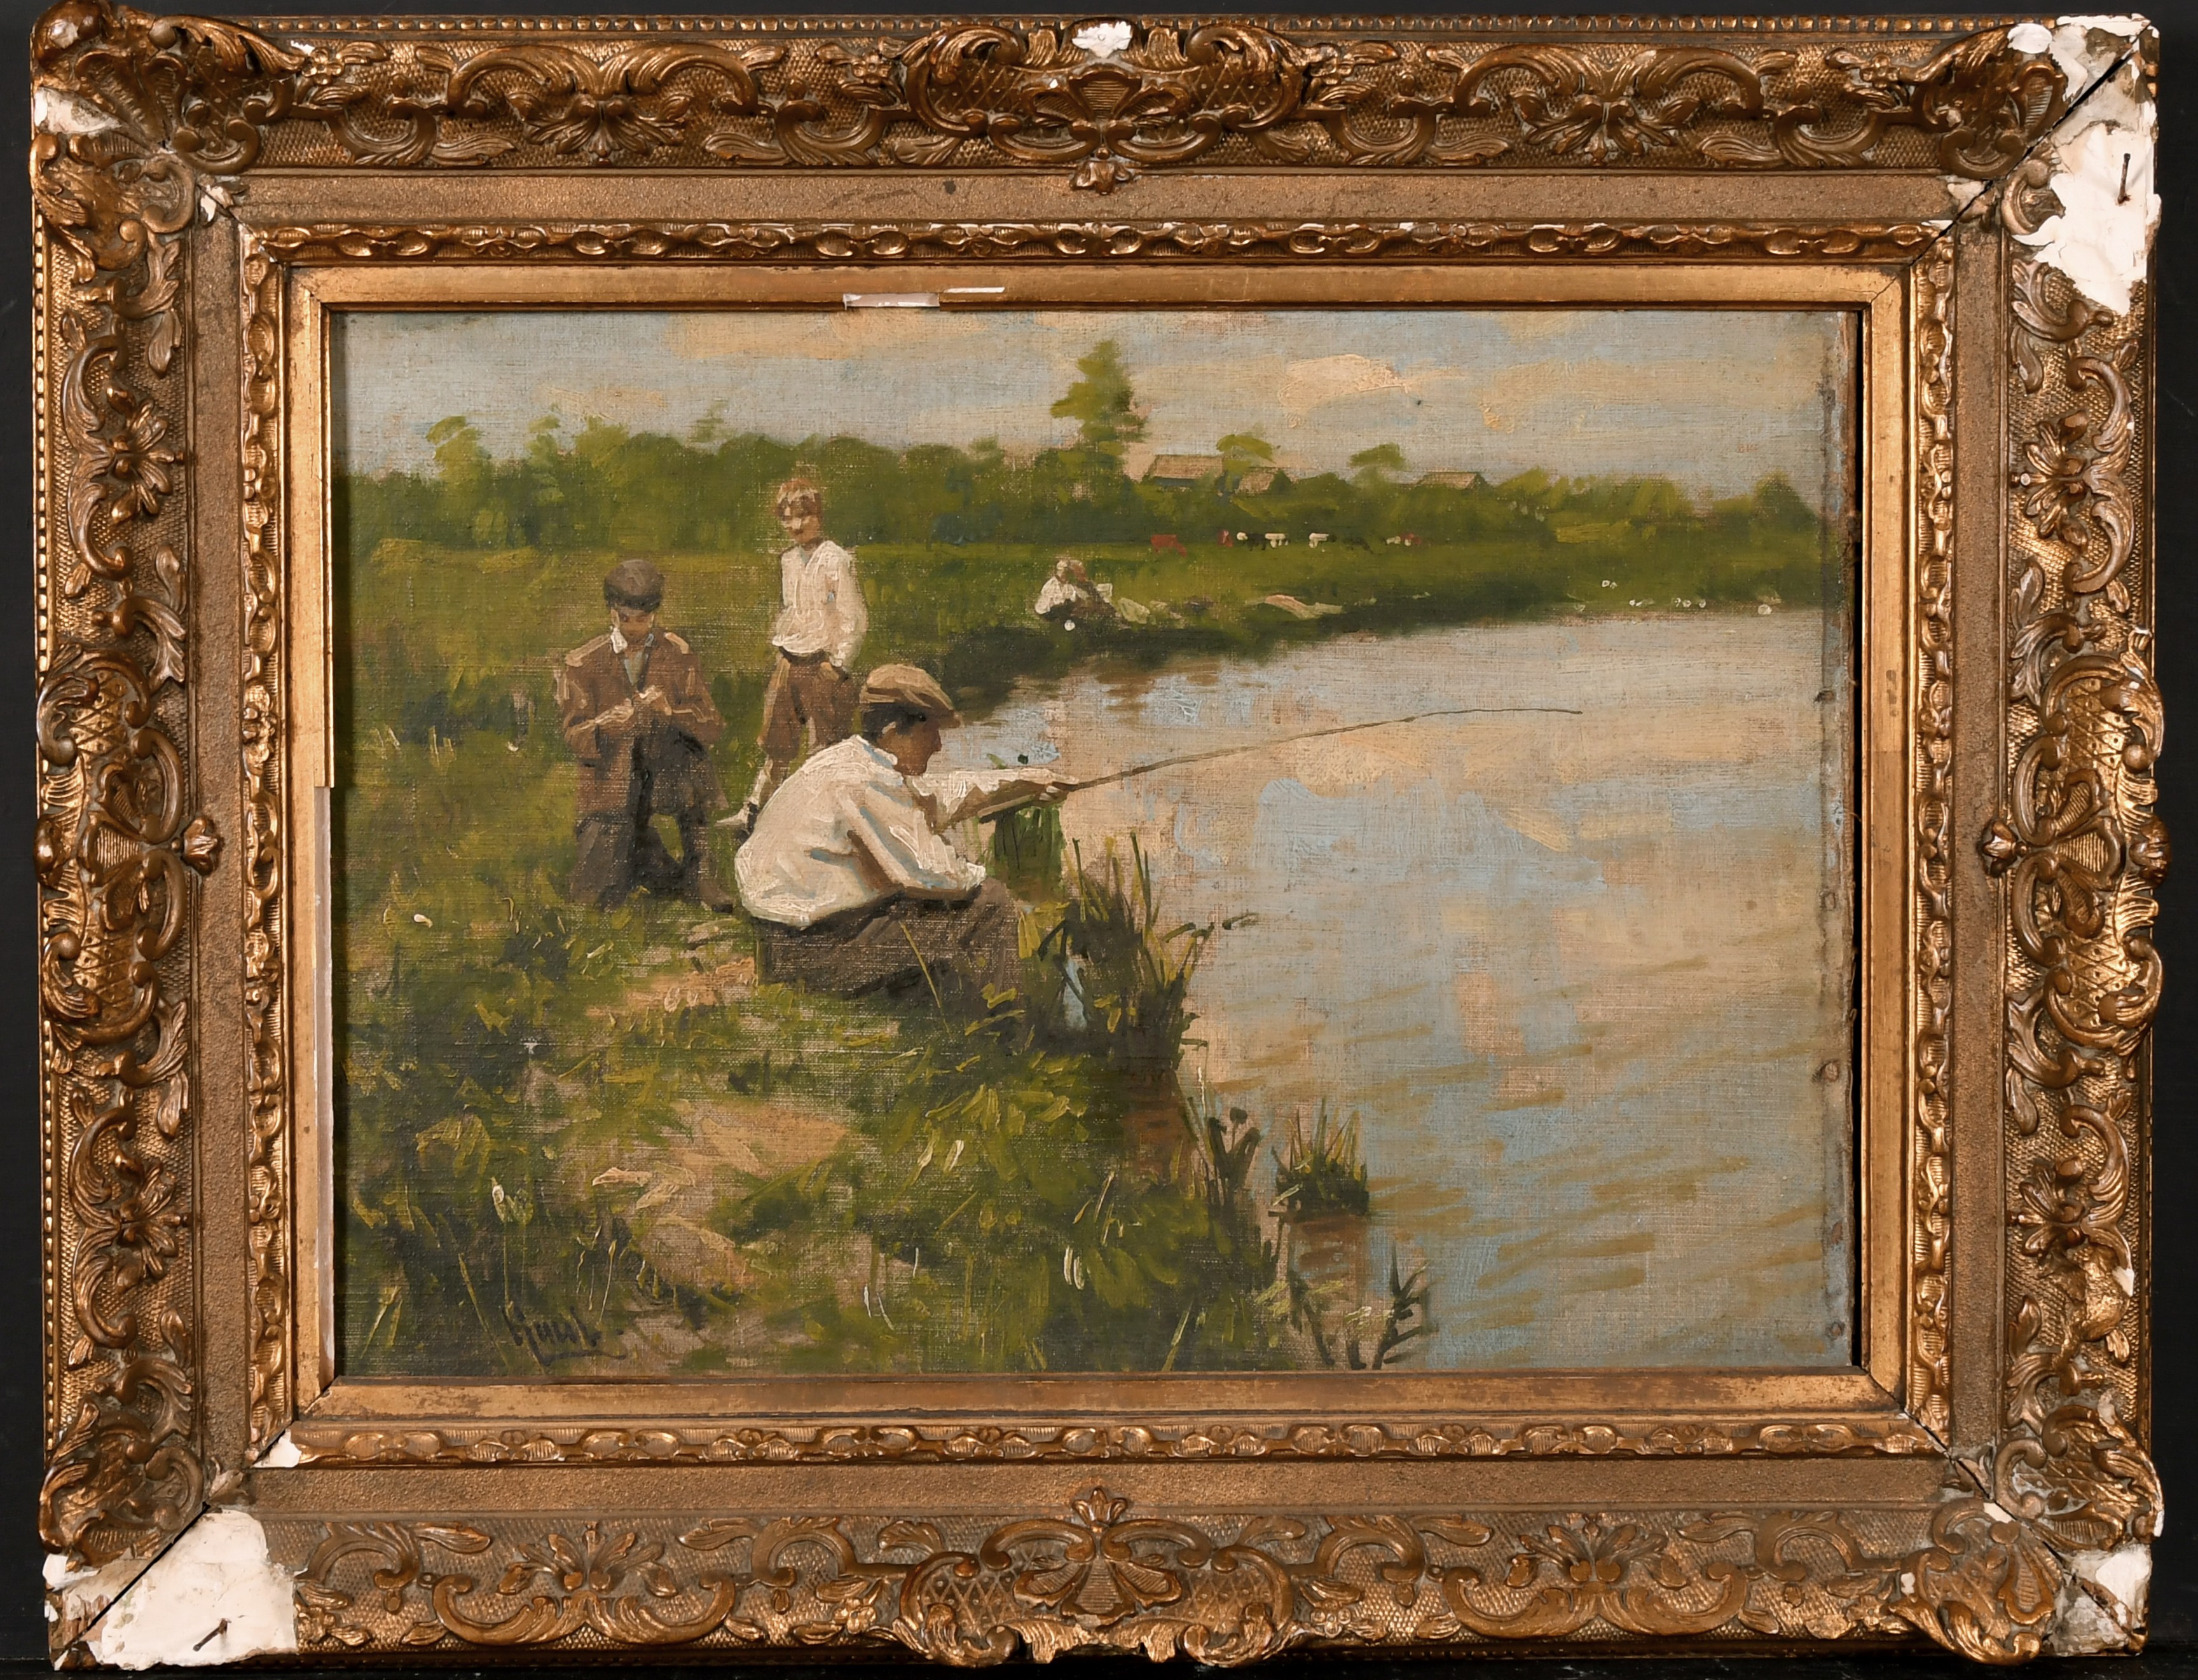 Gilbert William Gaul (1855-1919) American. "A Boy's Sport", a Sketch of Boys Fishing, Oil on Canvas - Image 2 of 4